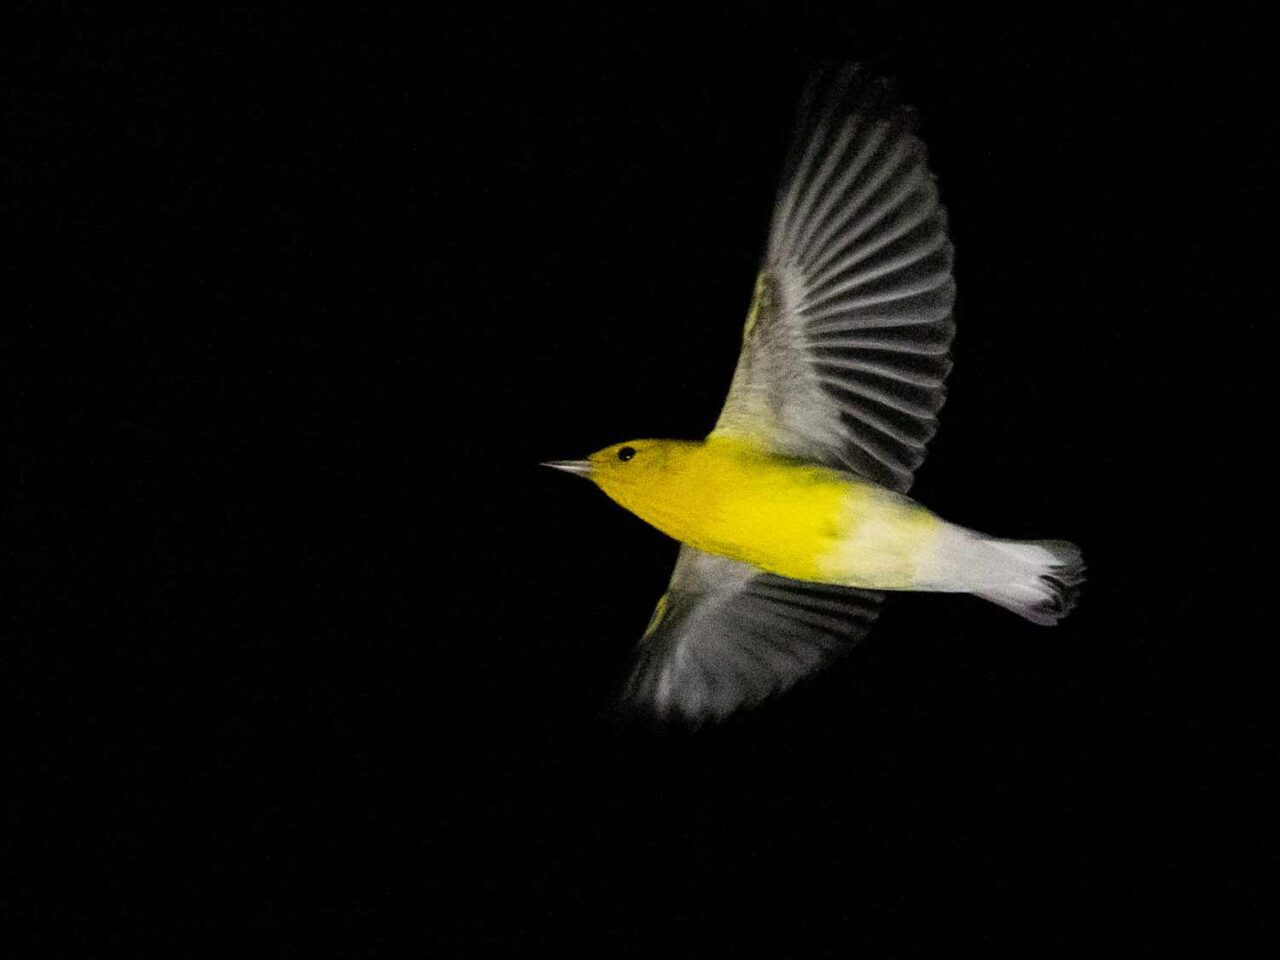 A mostly yellow bird in flight against a black sky.